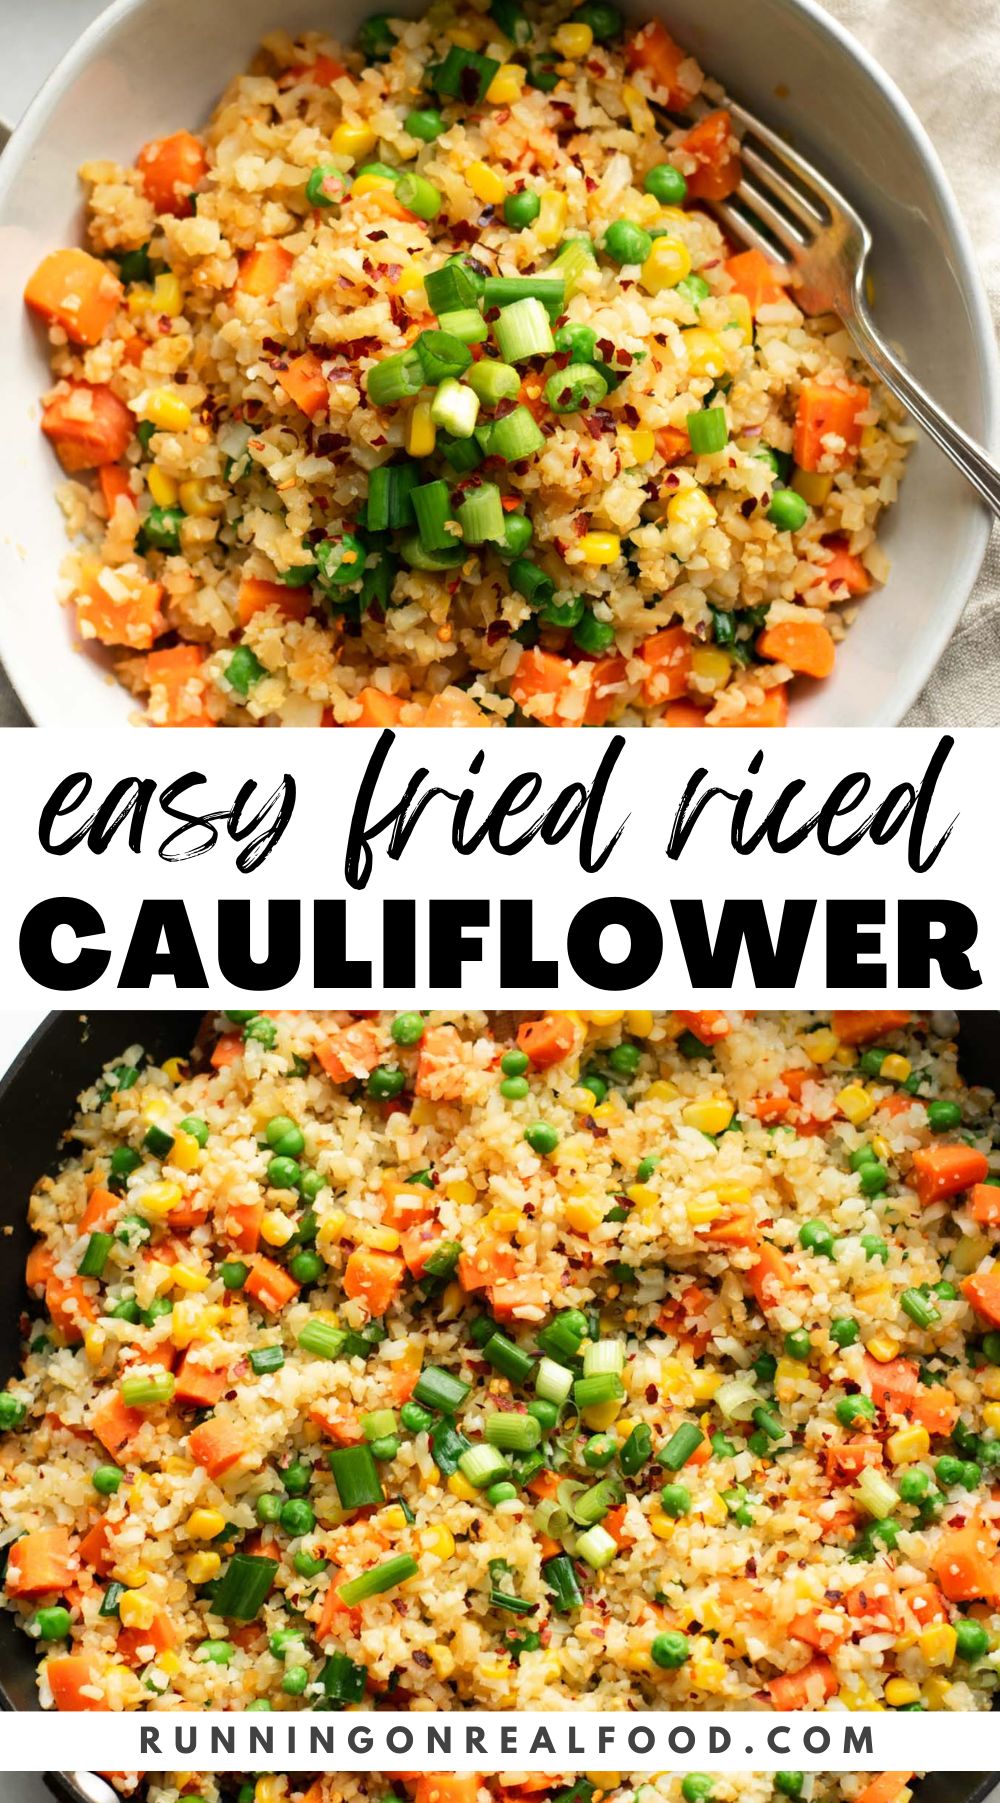 Pinterest graphic for a healthy vegan cauliflower fried rice recipe with images and text.